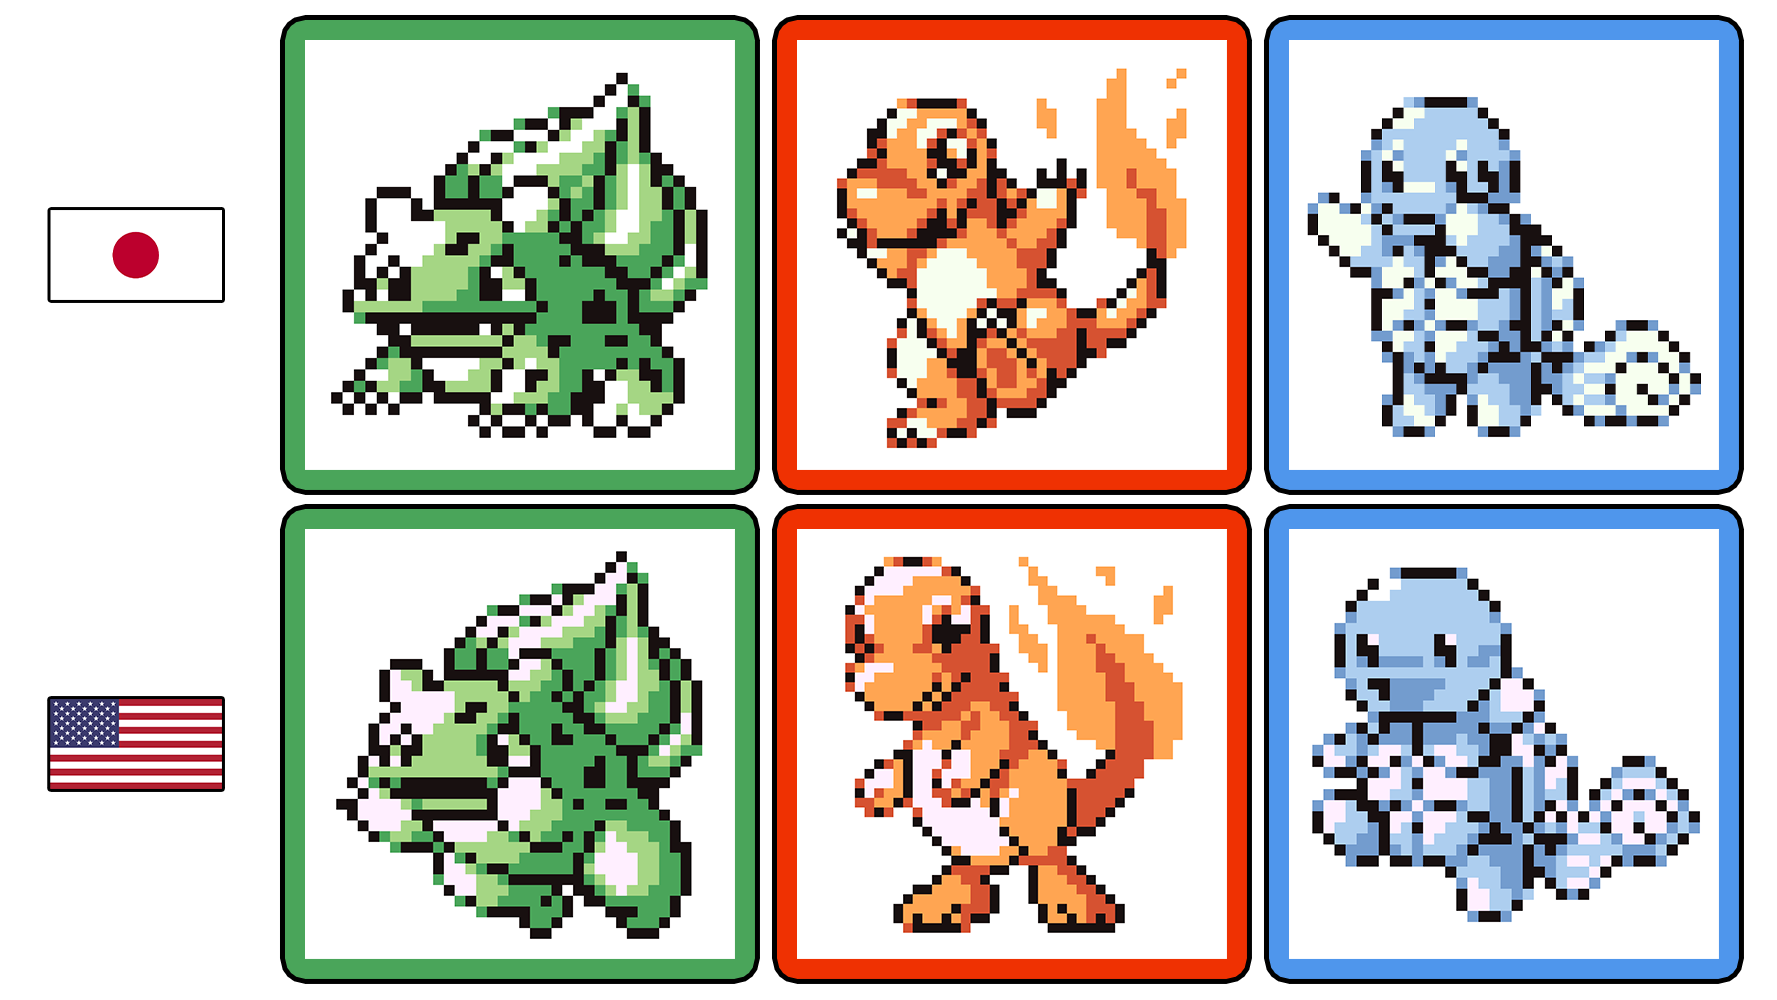 Red and Green sprites